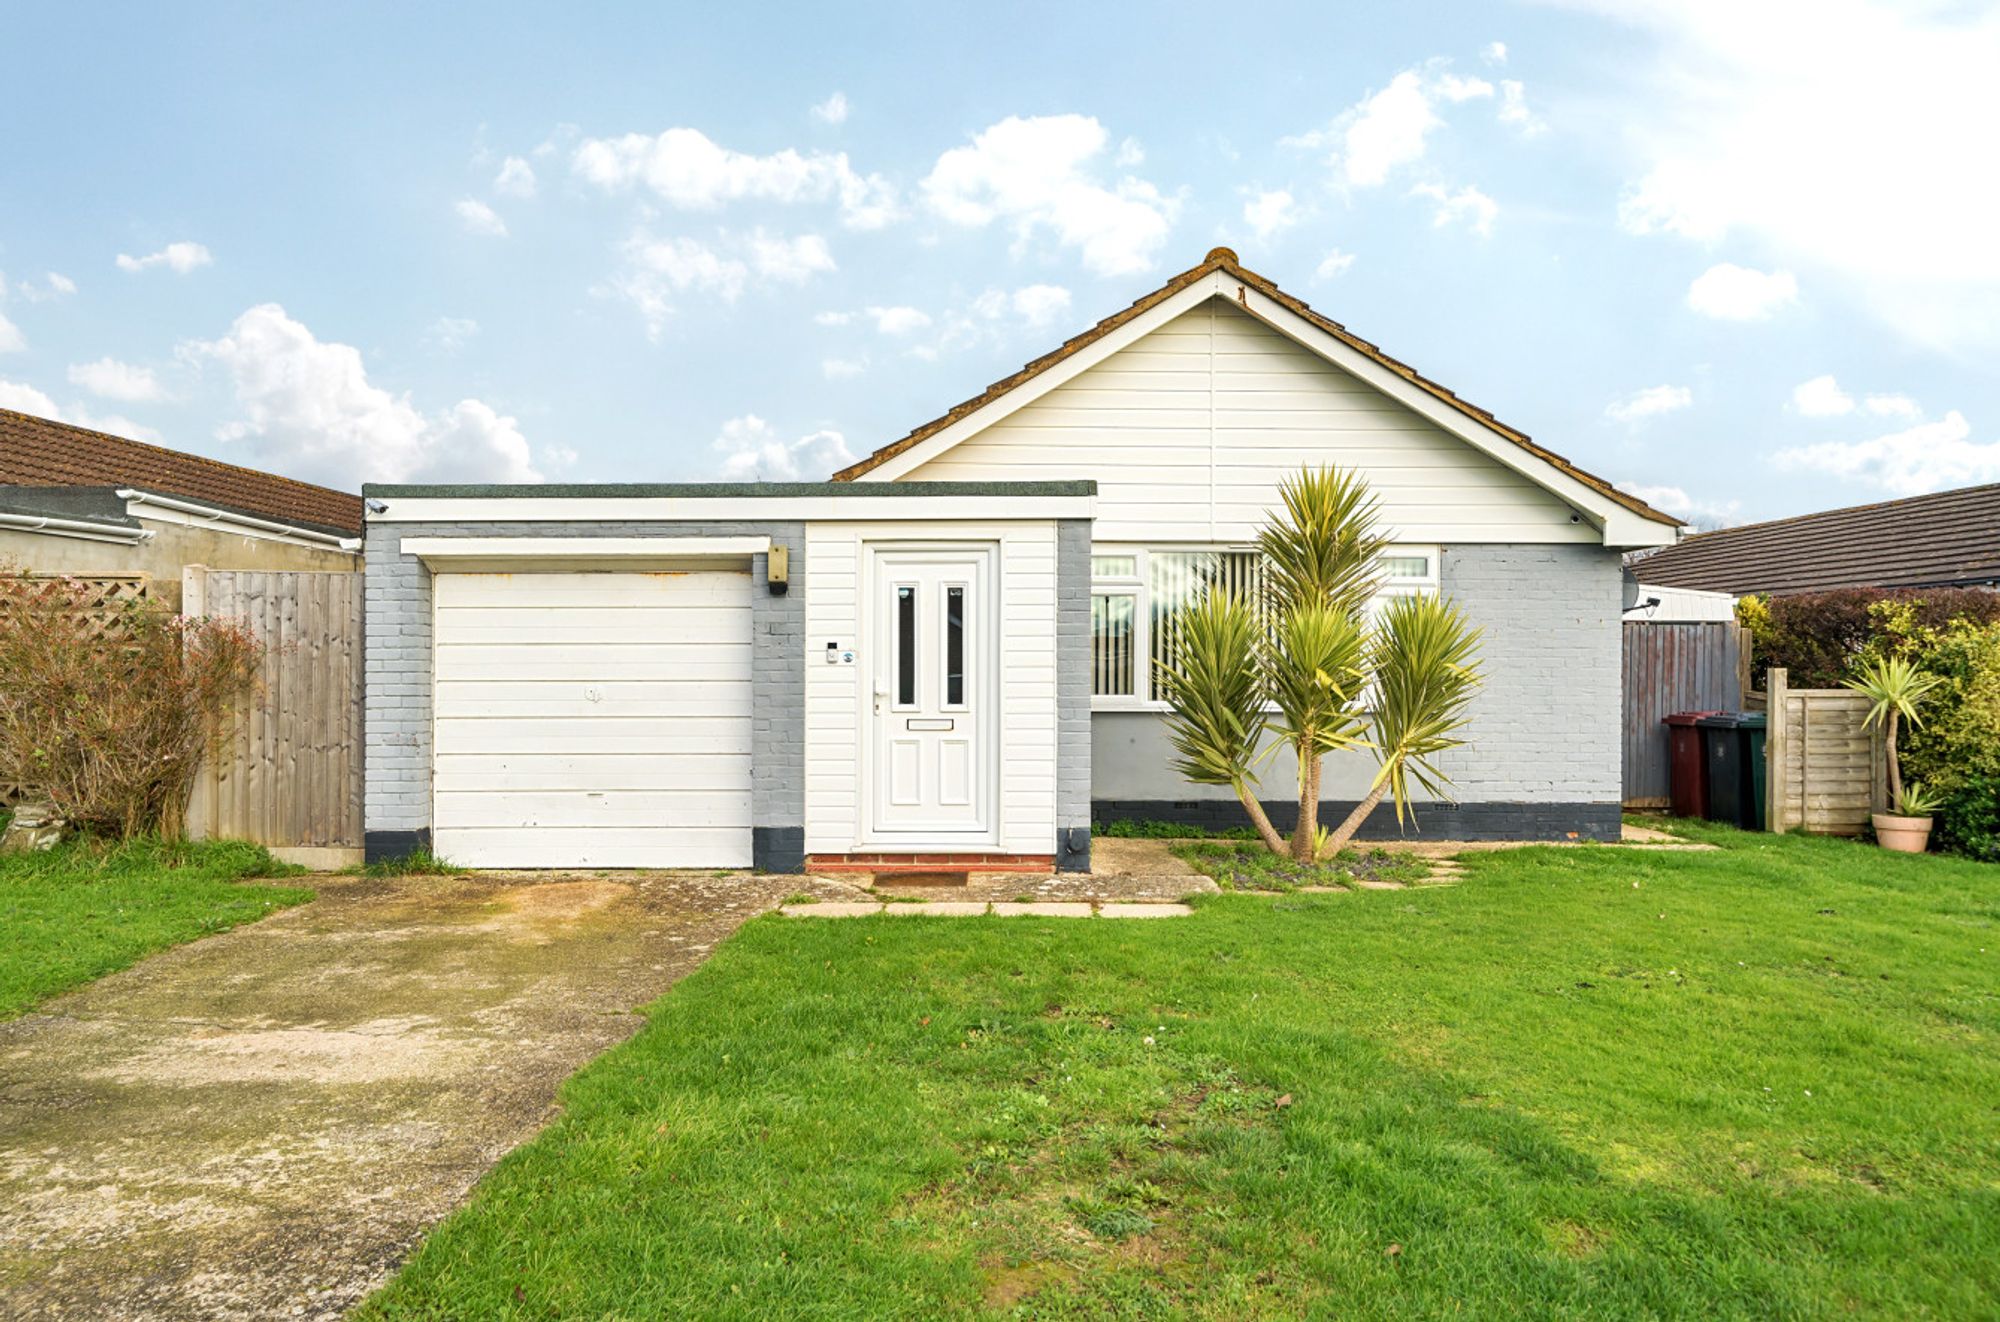 Sunnymead Drive, Selsey, PO20